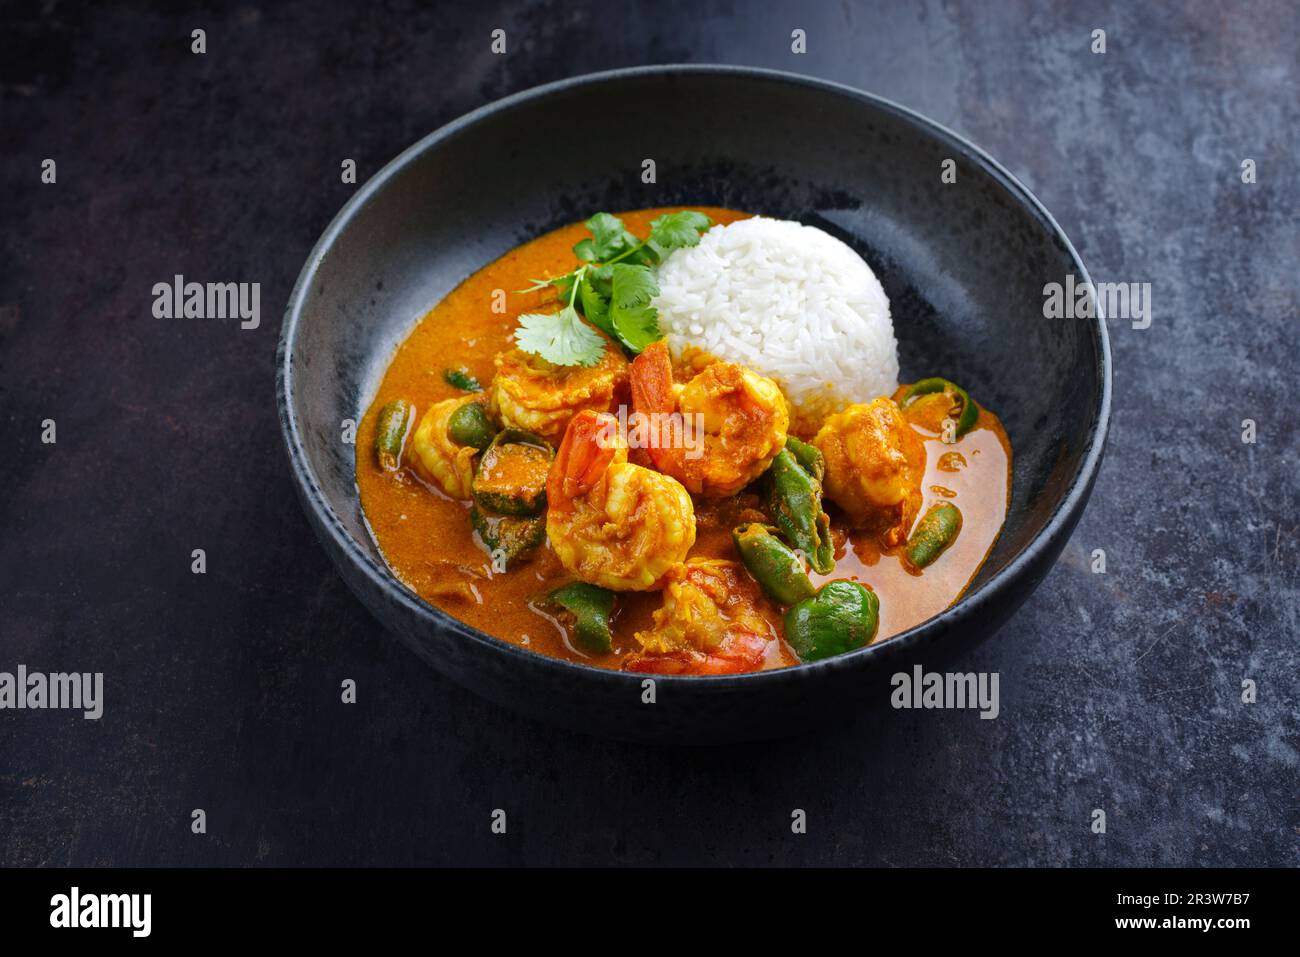 Traditional Thai kaeng phet red curry with chili and basmati rice served as close-up in a Nordic design bowl Stock Photo